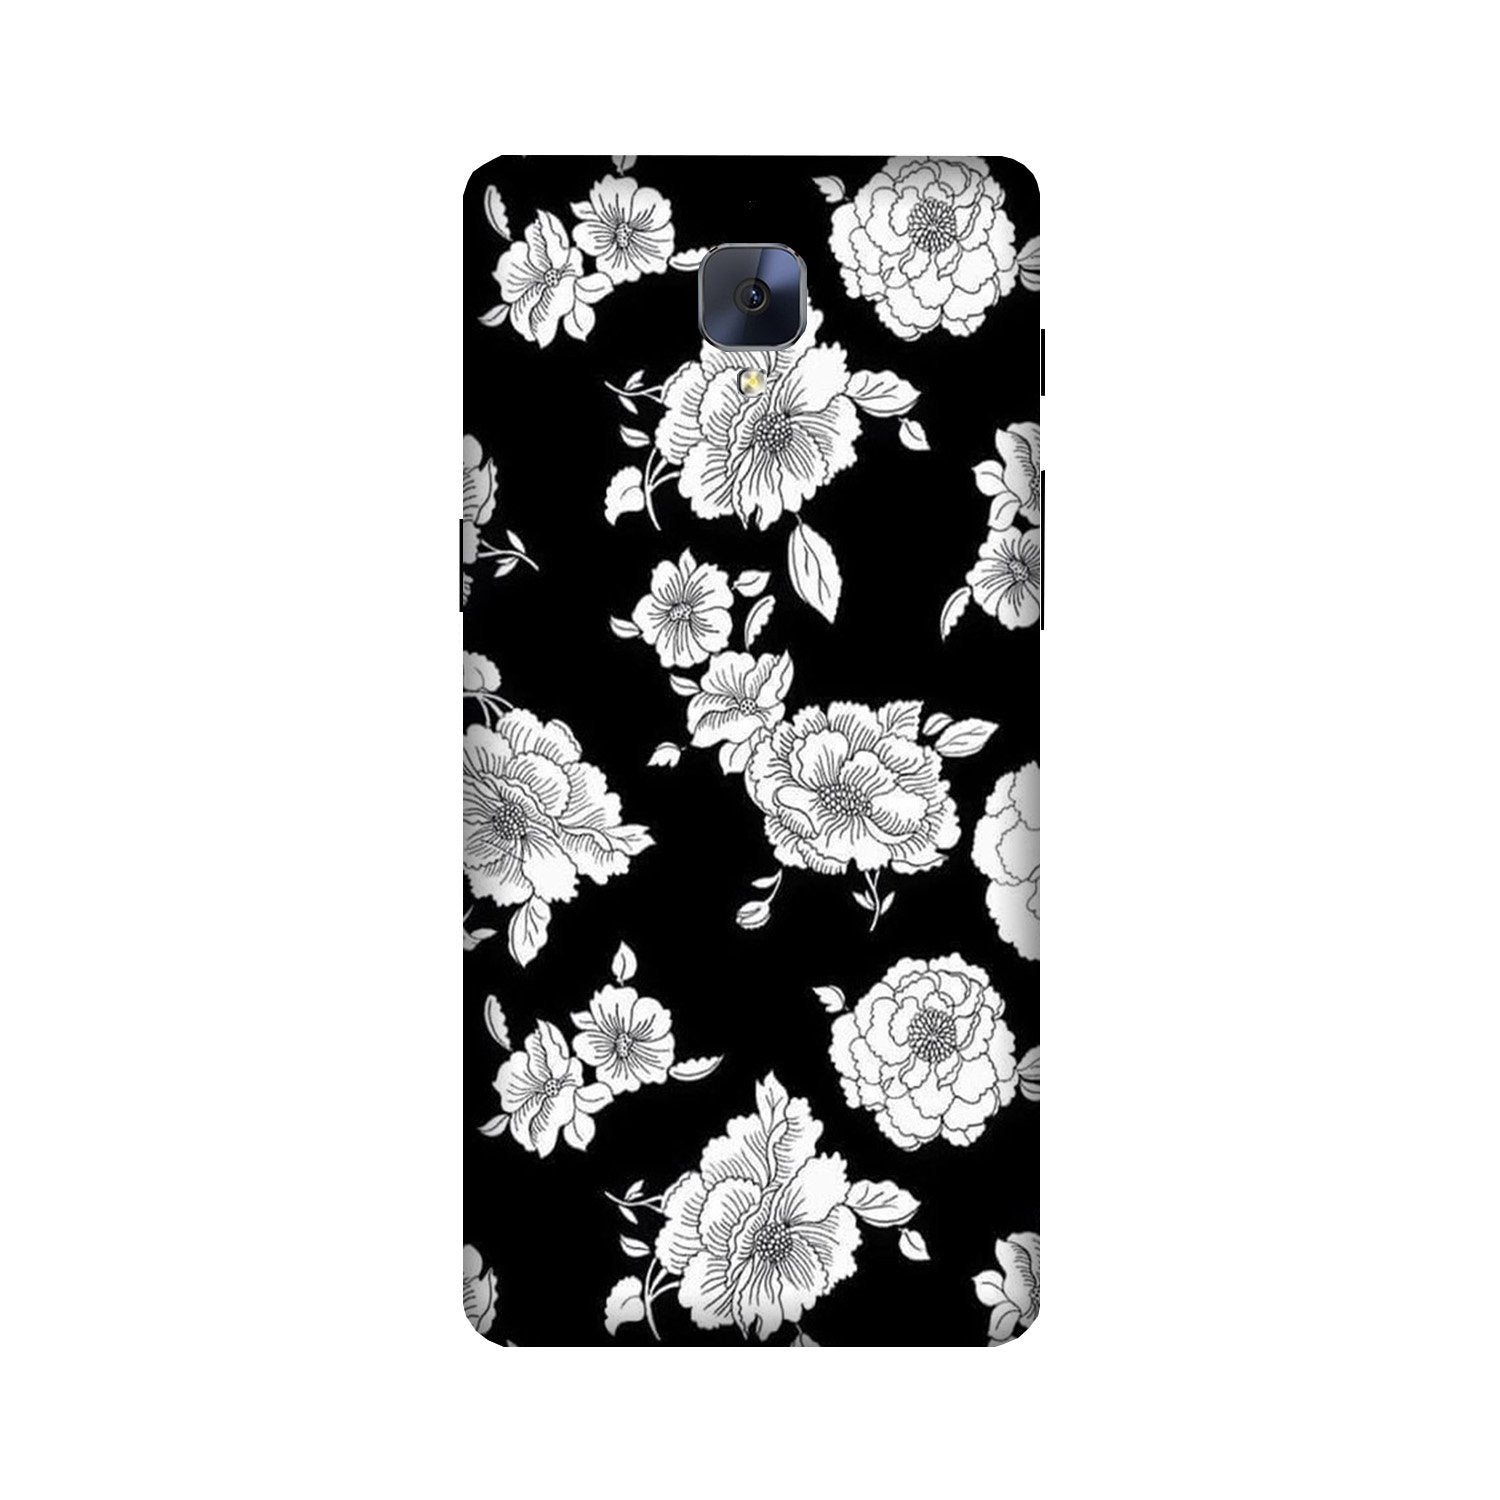 White flowers Black Background Case for OnePlus 3/ 3T